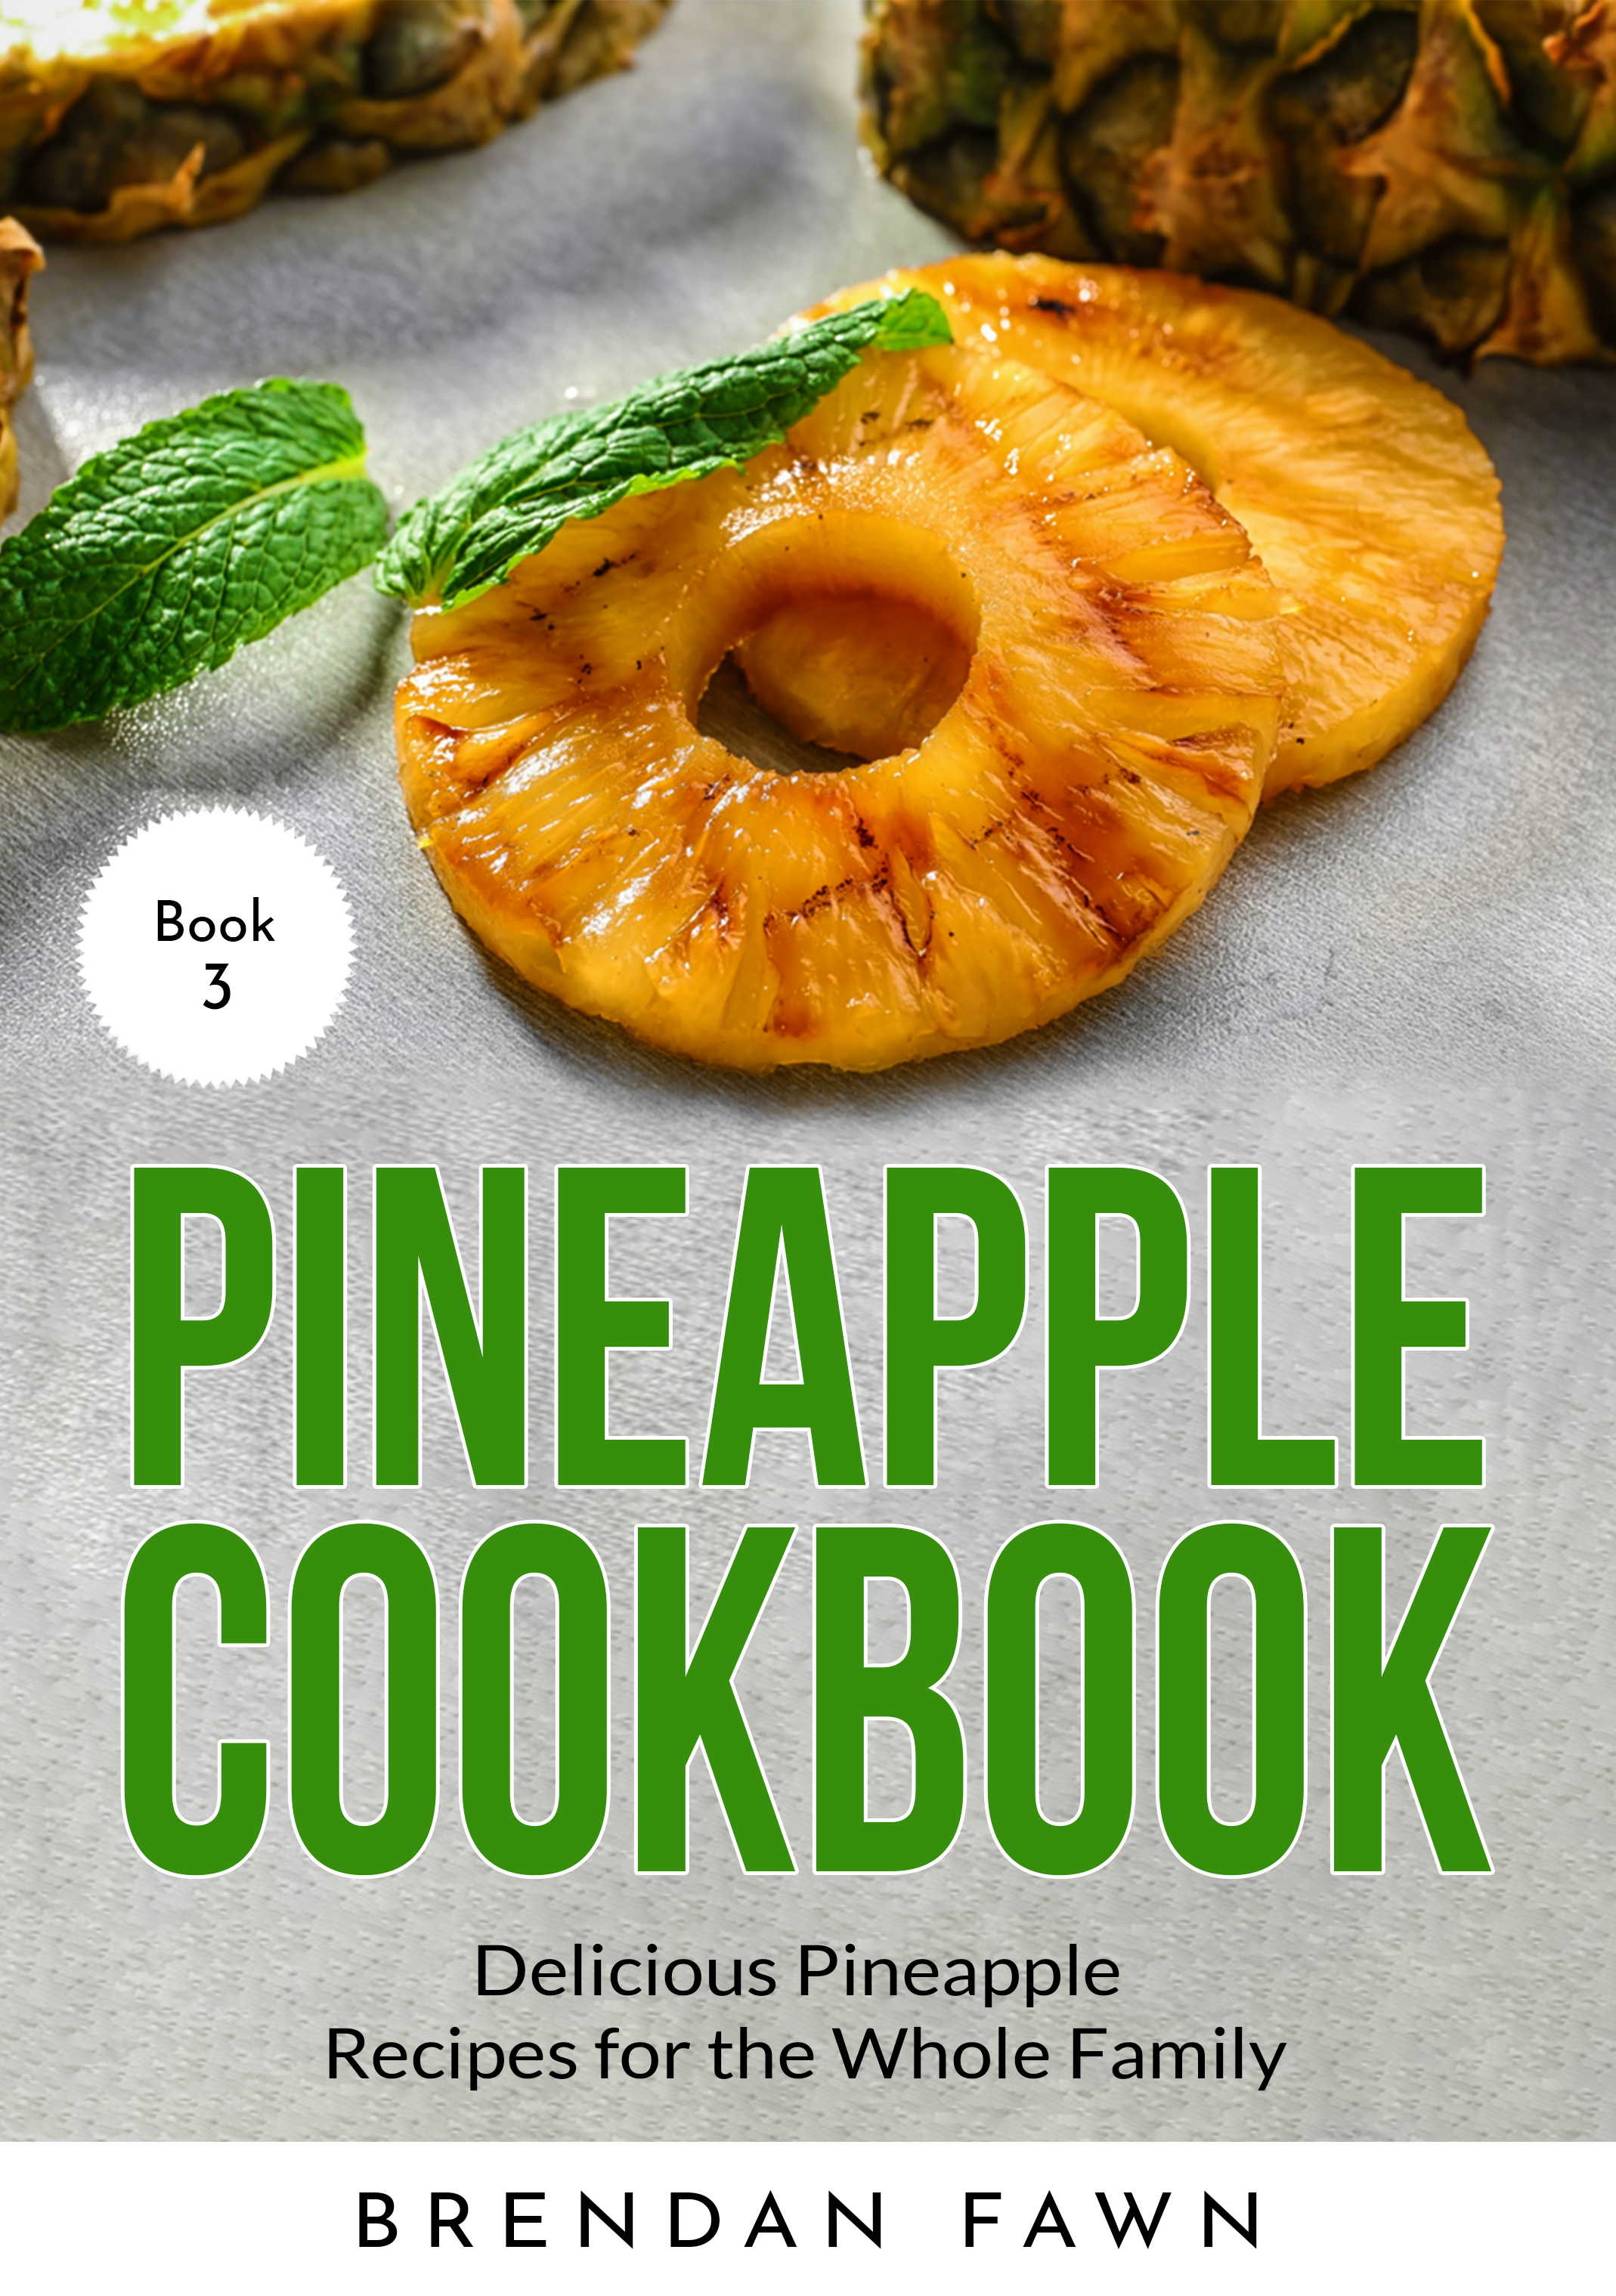 FREE: Pineapple Cookbook: Delicious Pineapple Recipes for the Whole Family by Brendan Fawn